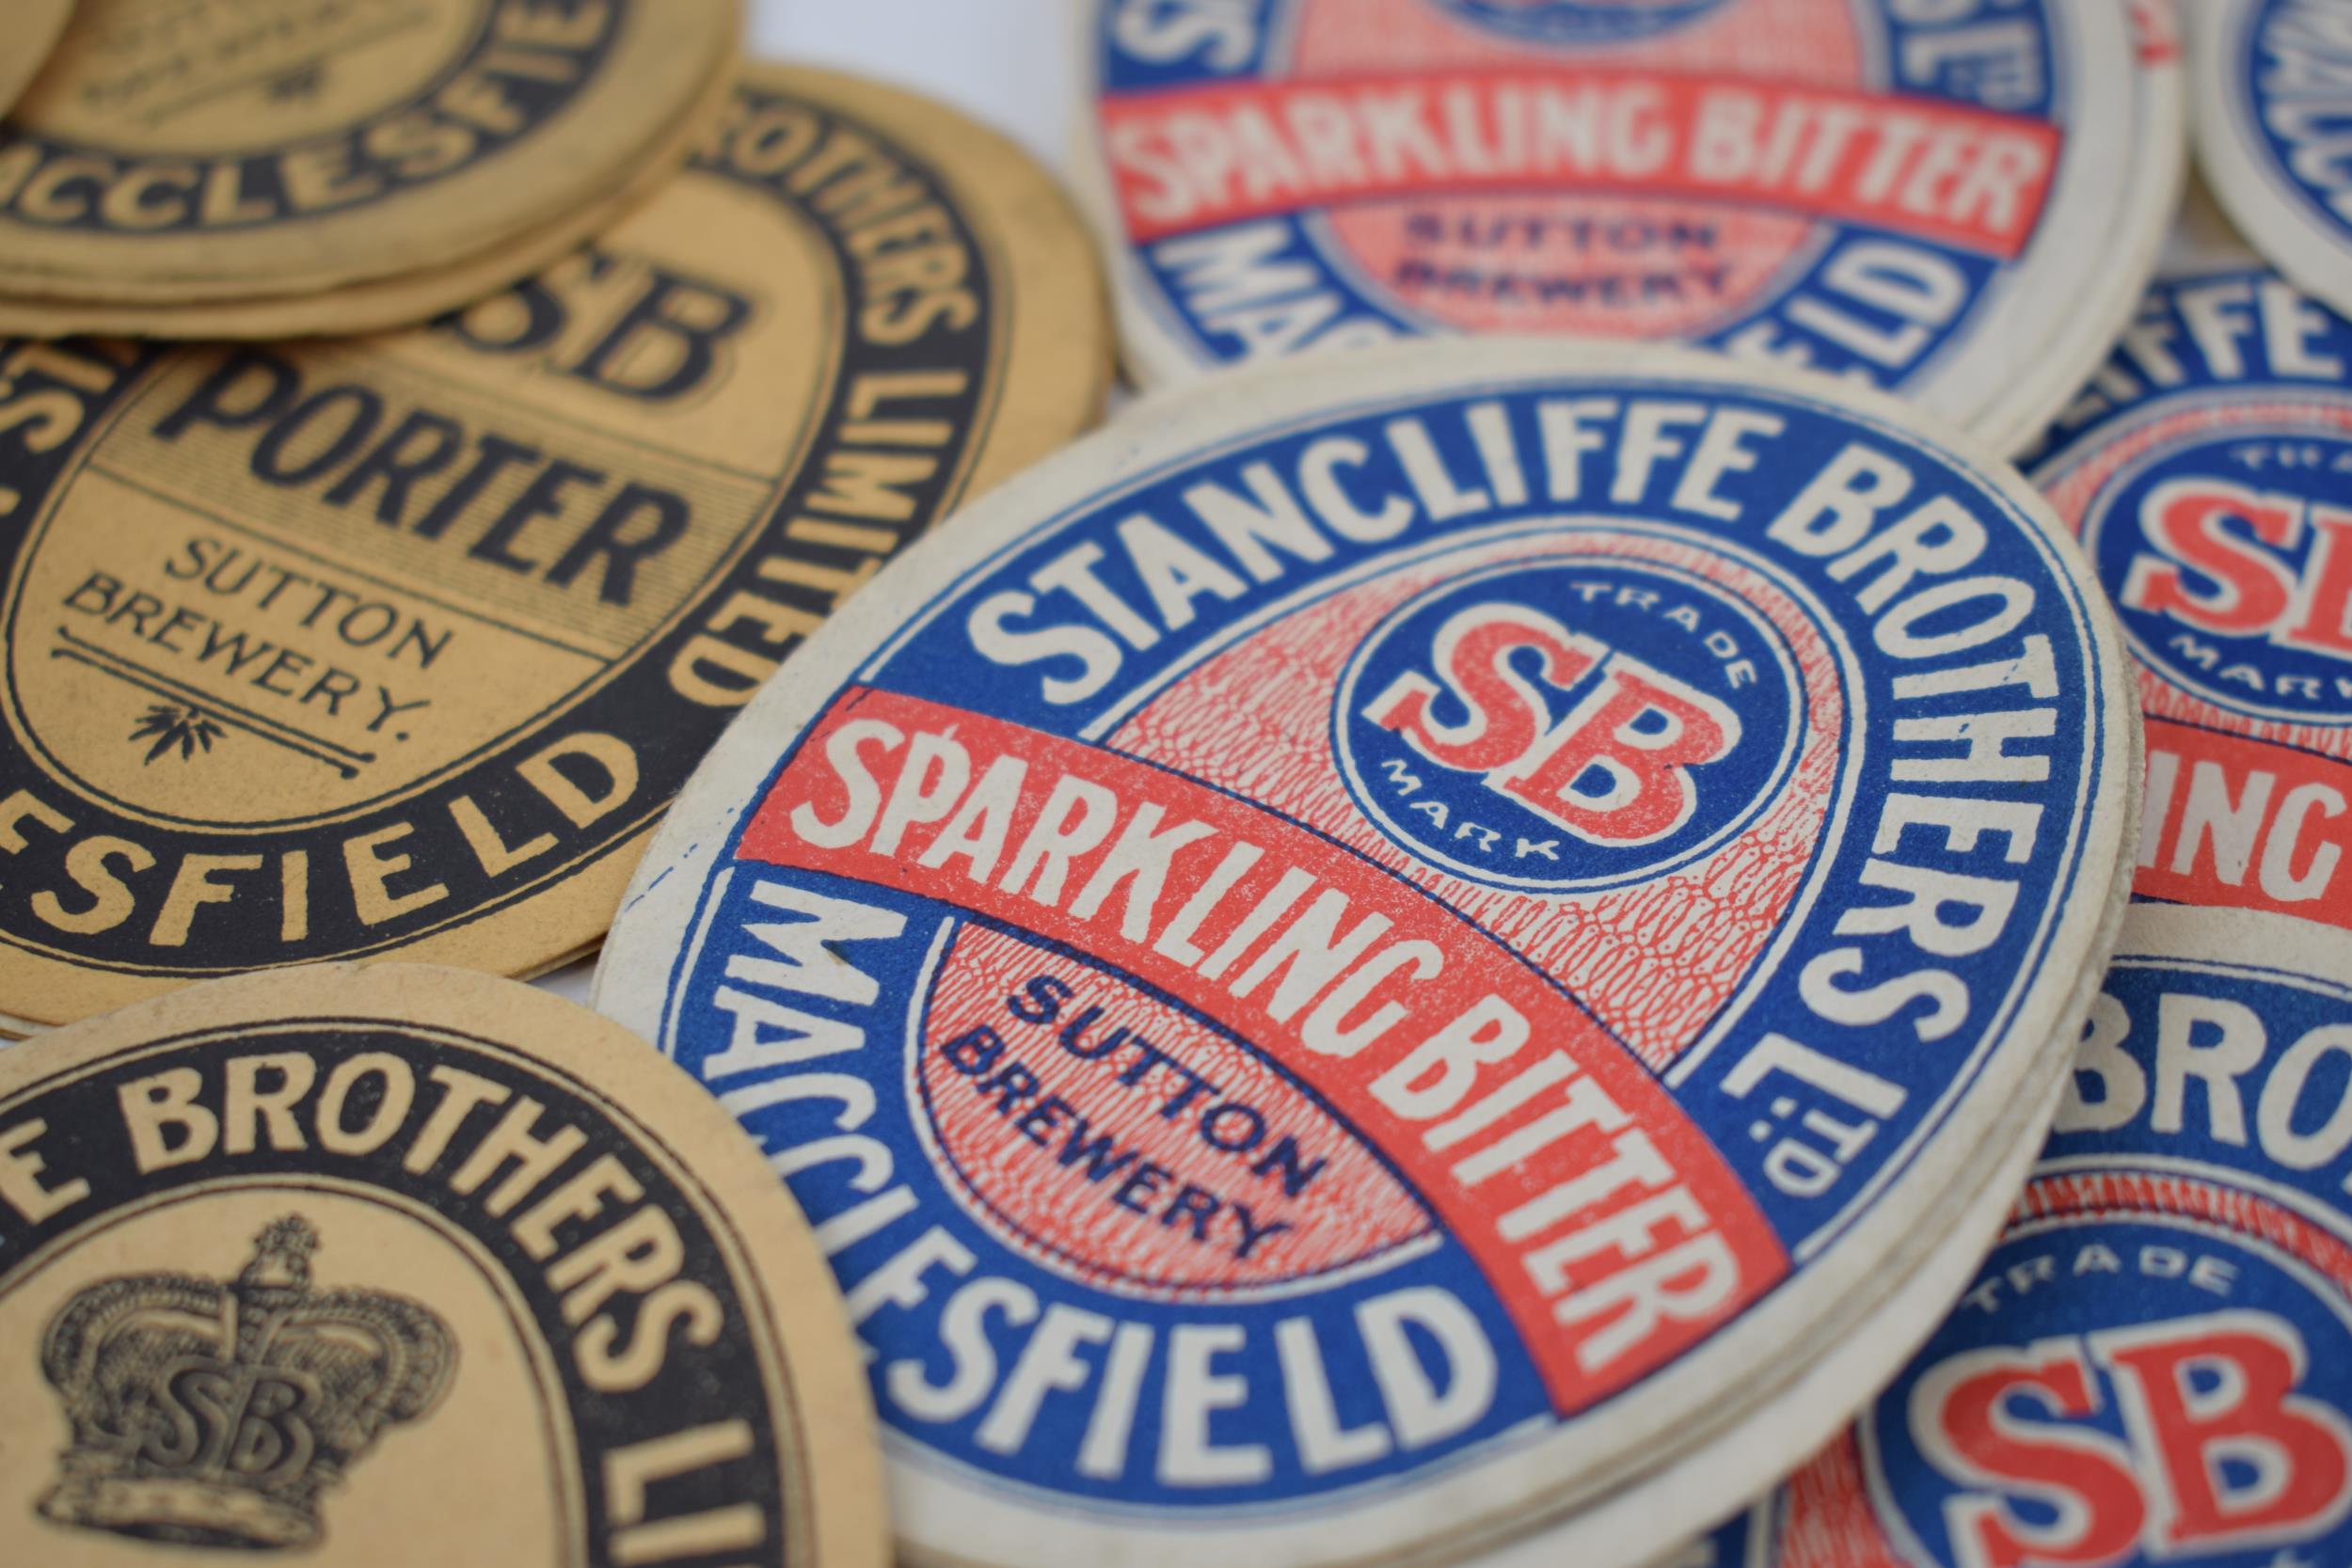 A quantity of original beer labels for 'Stancliffe Brothers Ltd' Sparkling Bitter, Coronation Stout,